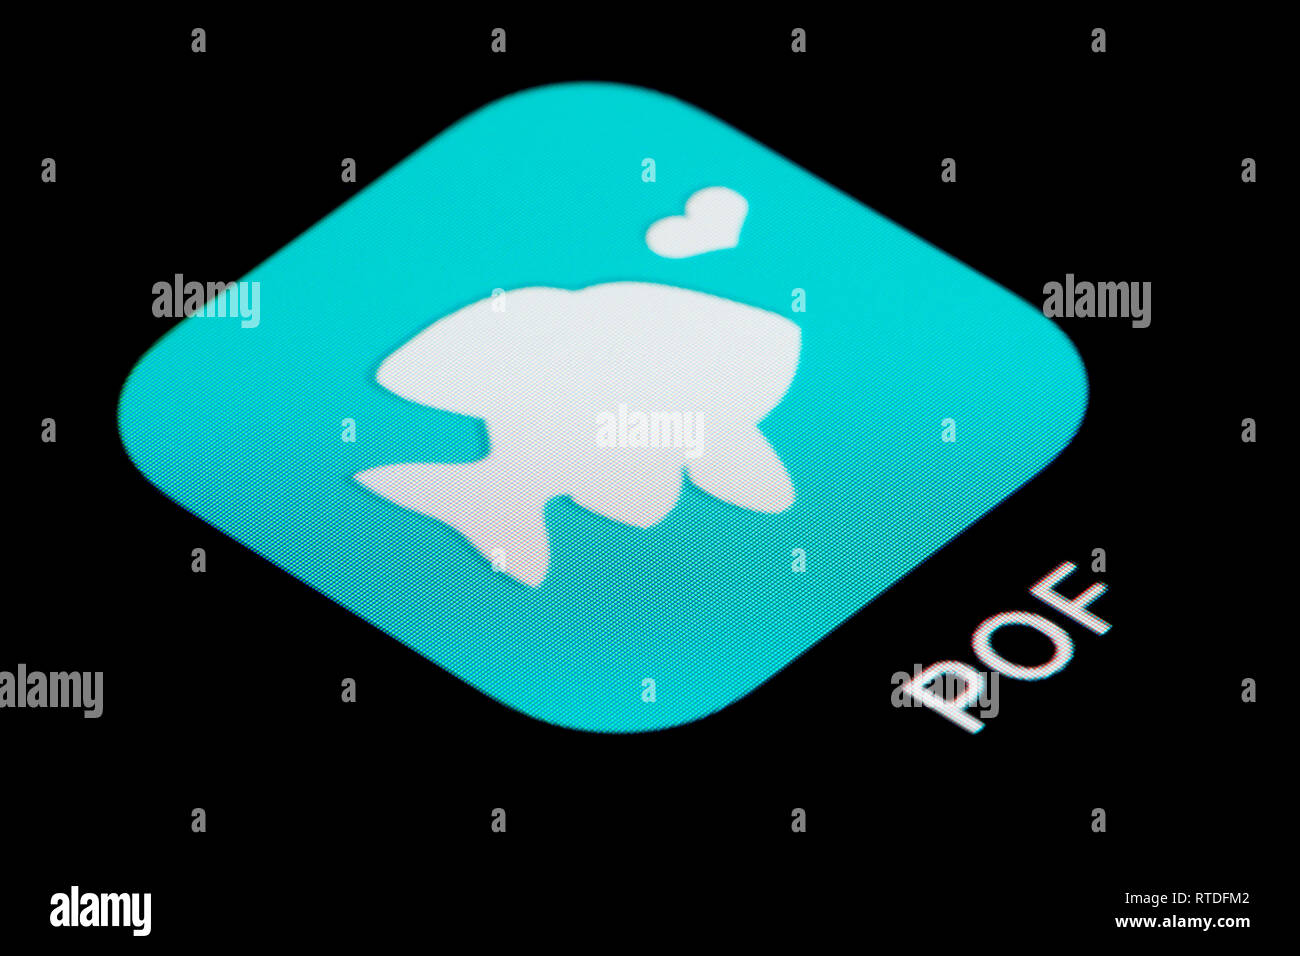 A close-up shot of the Plenty of fish (POF) app icon, as seen on the screen of a smart phone (Editorial use only) Stock Photo